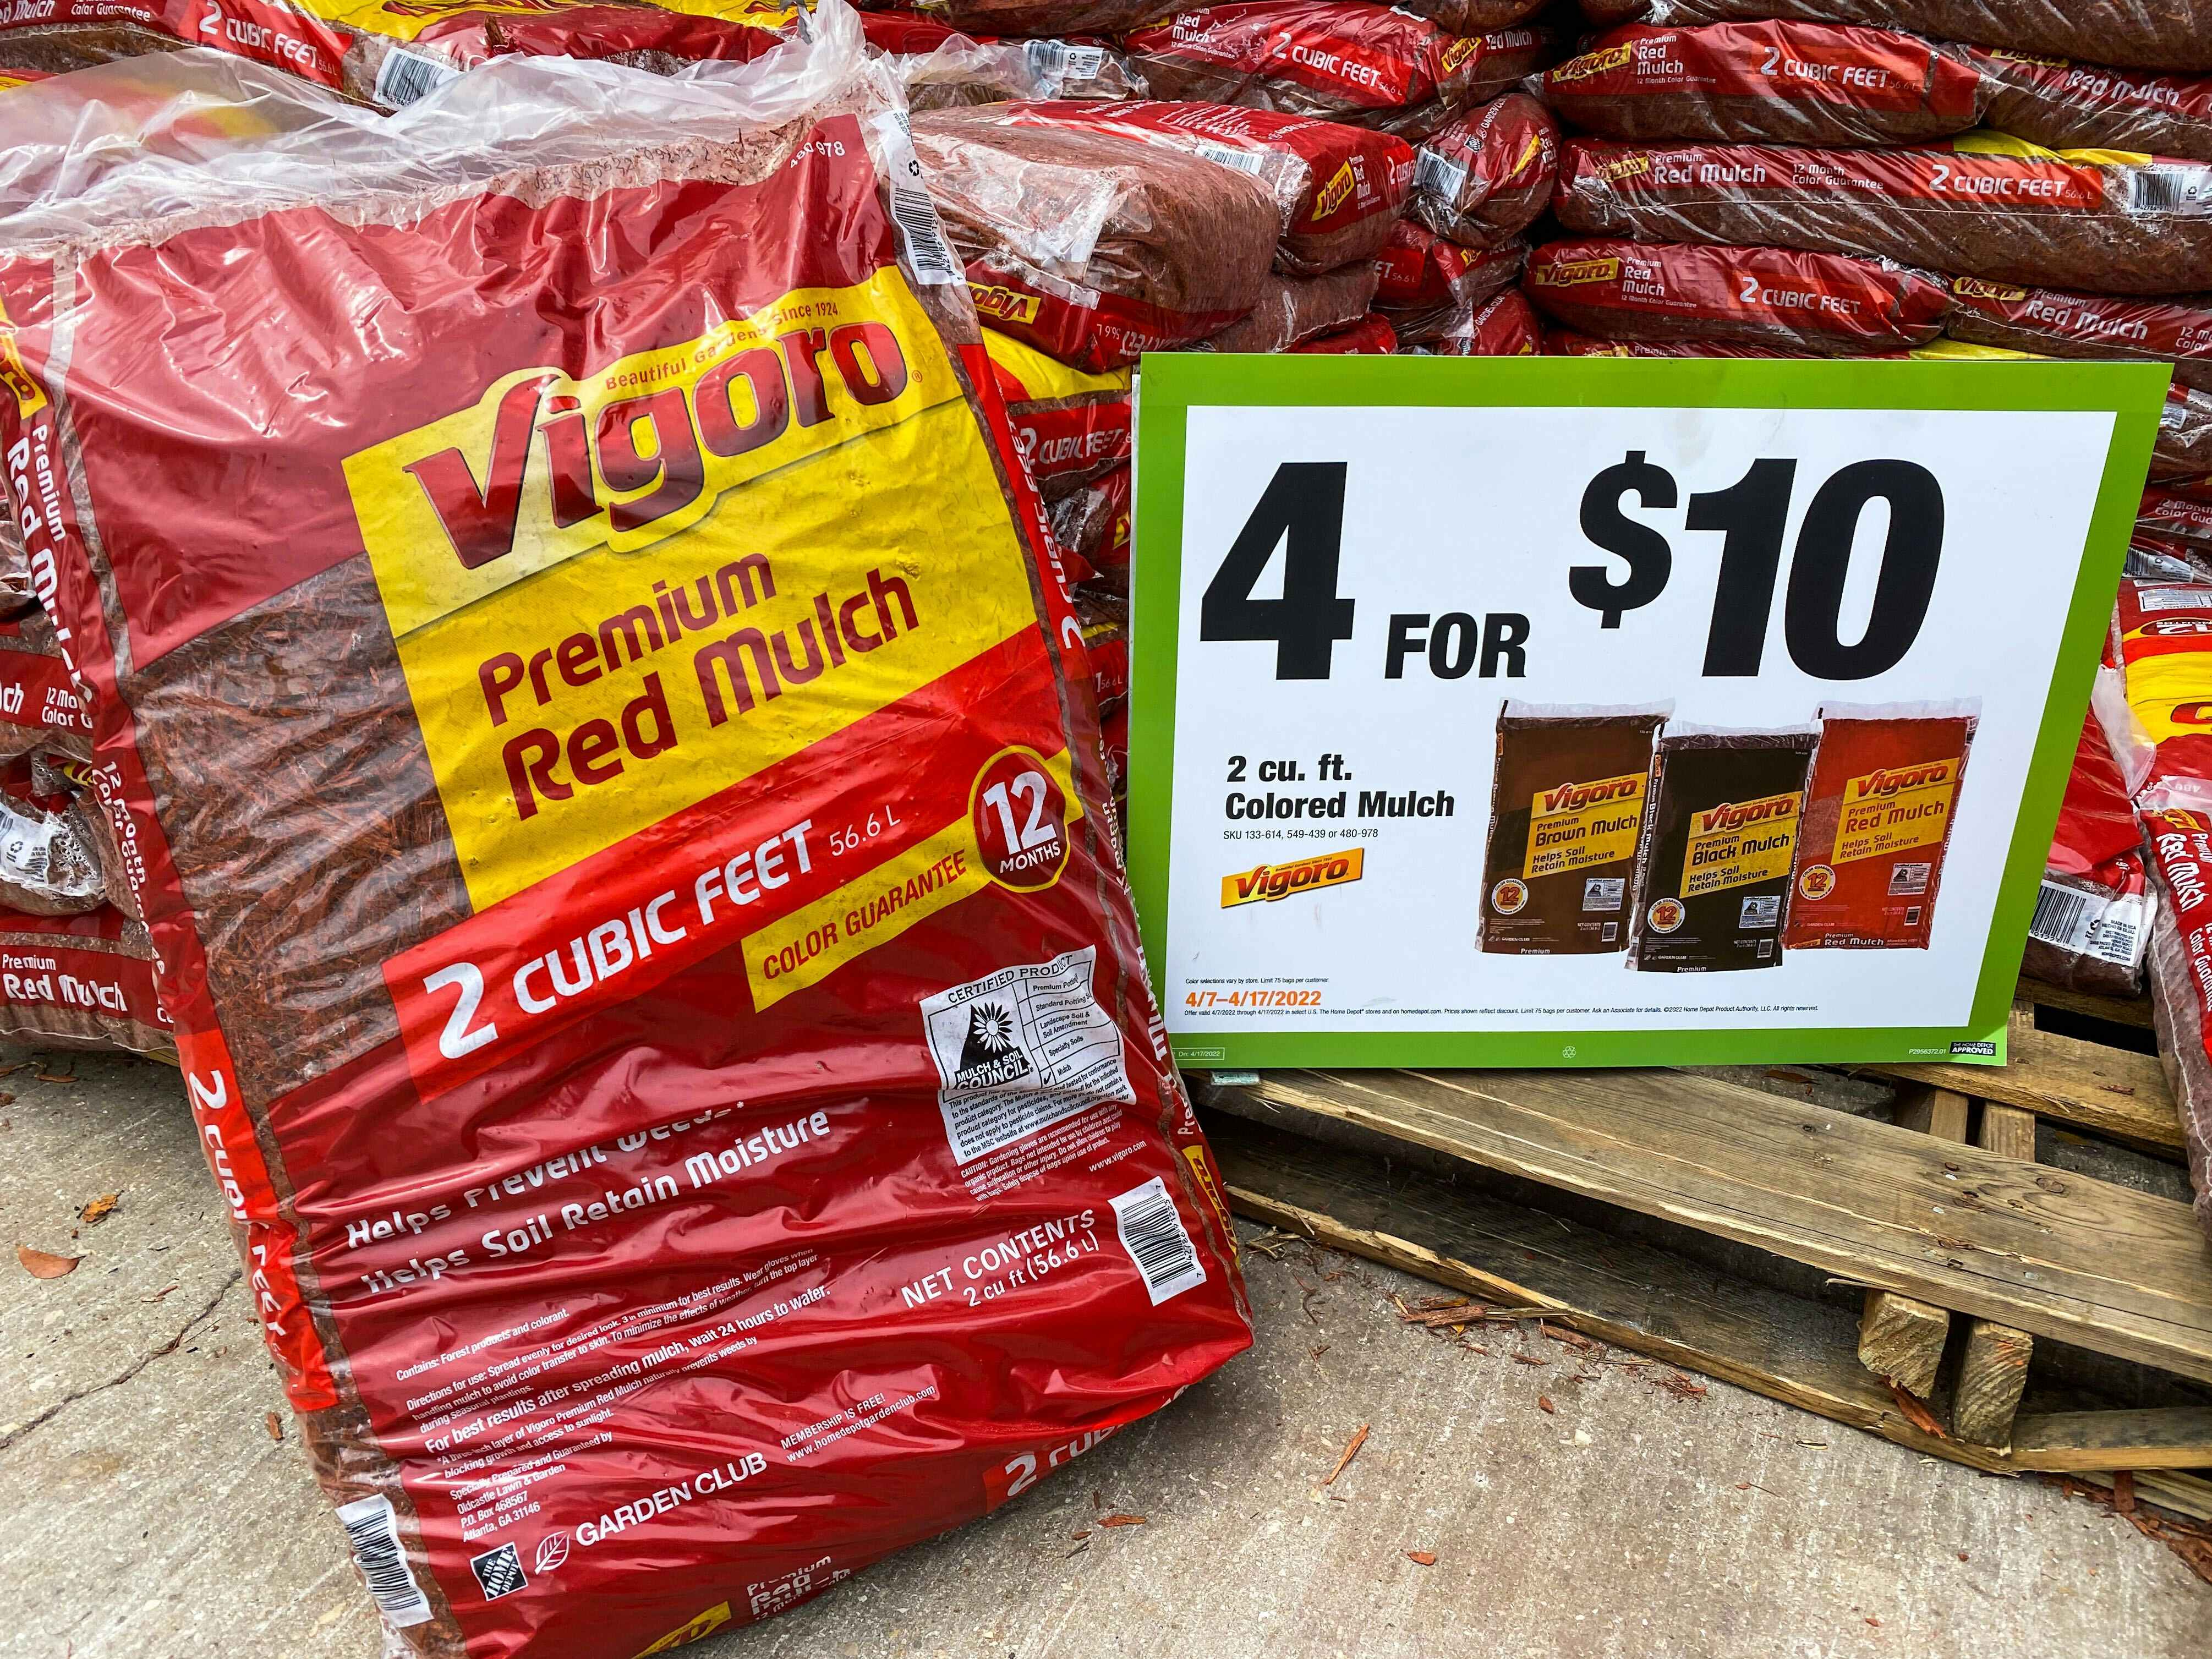  A bag of vigoro red mulch next to a 4 for $10 sign at Home Depot